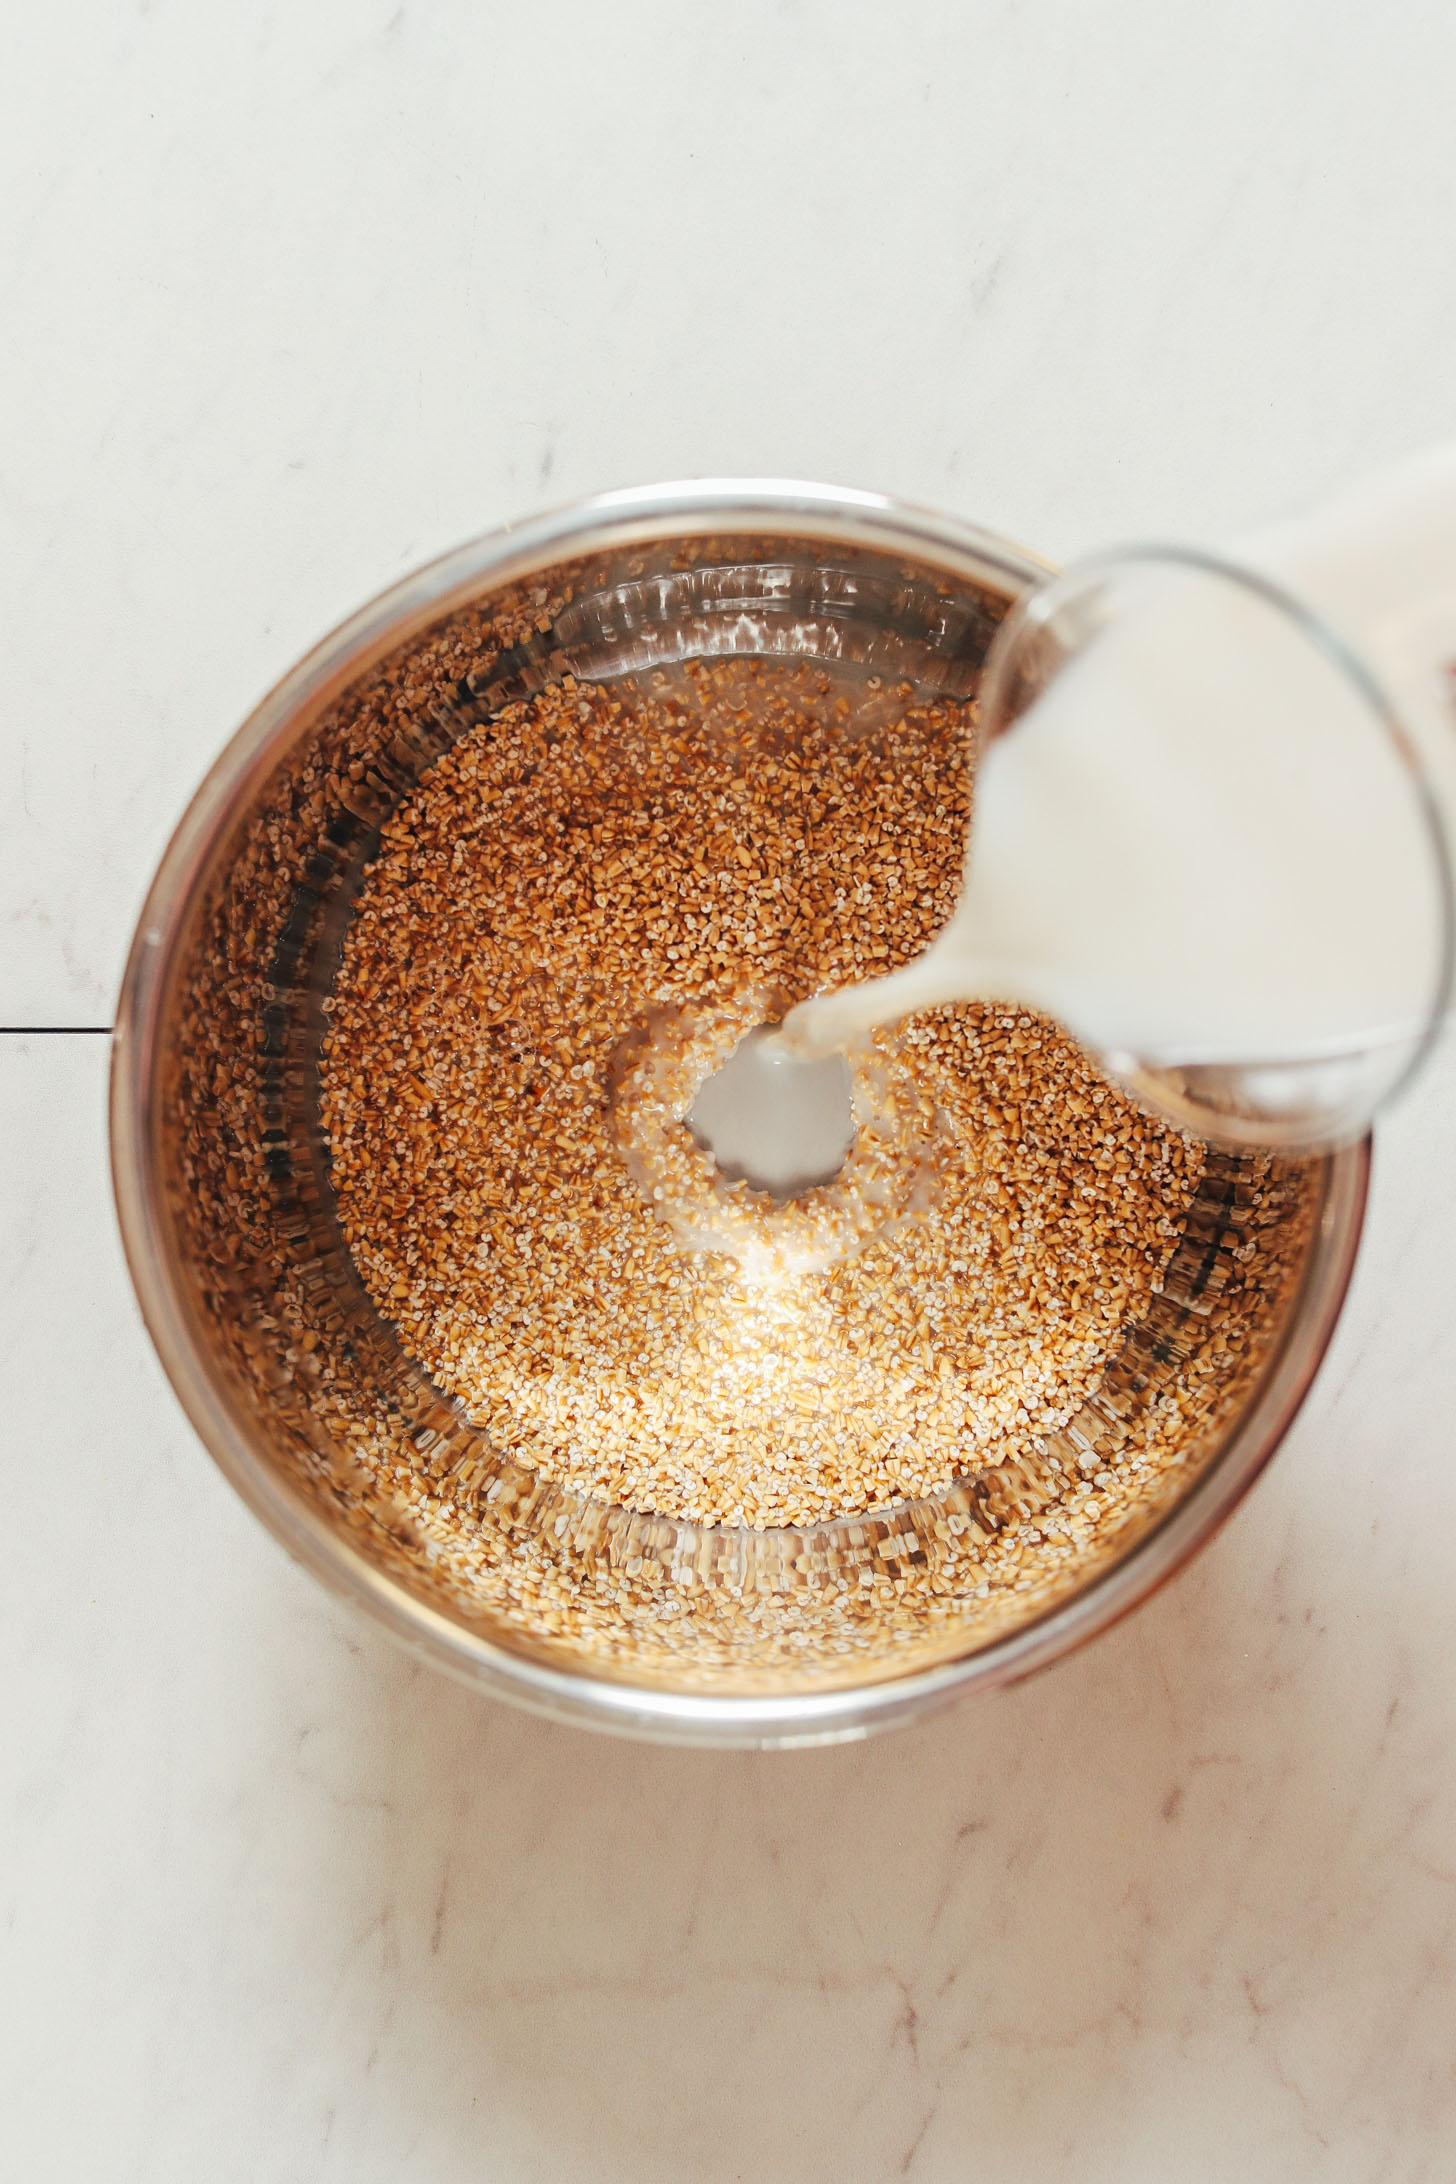 Pouring dairy-free milk into an Instant Pot of steel cut oats